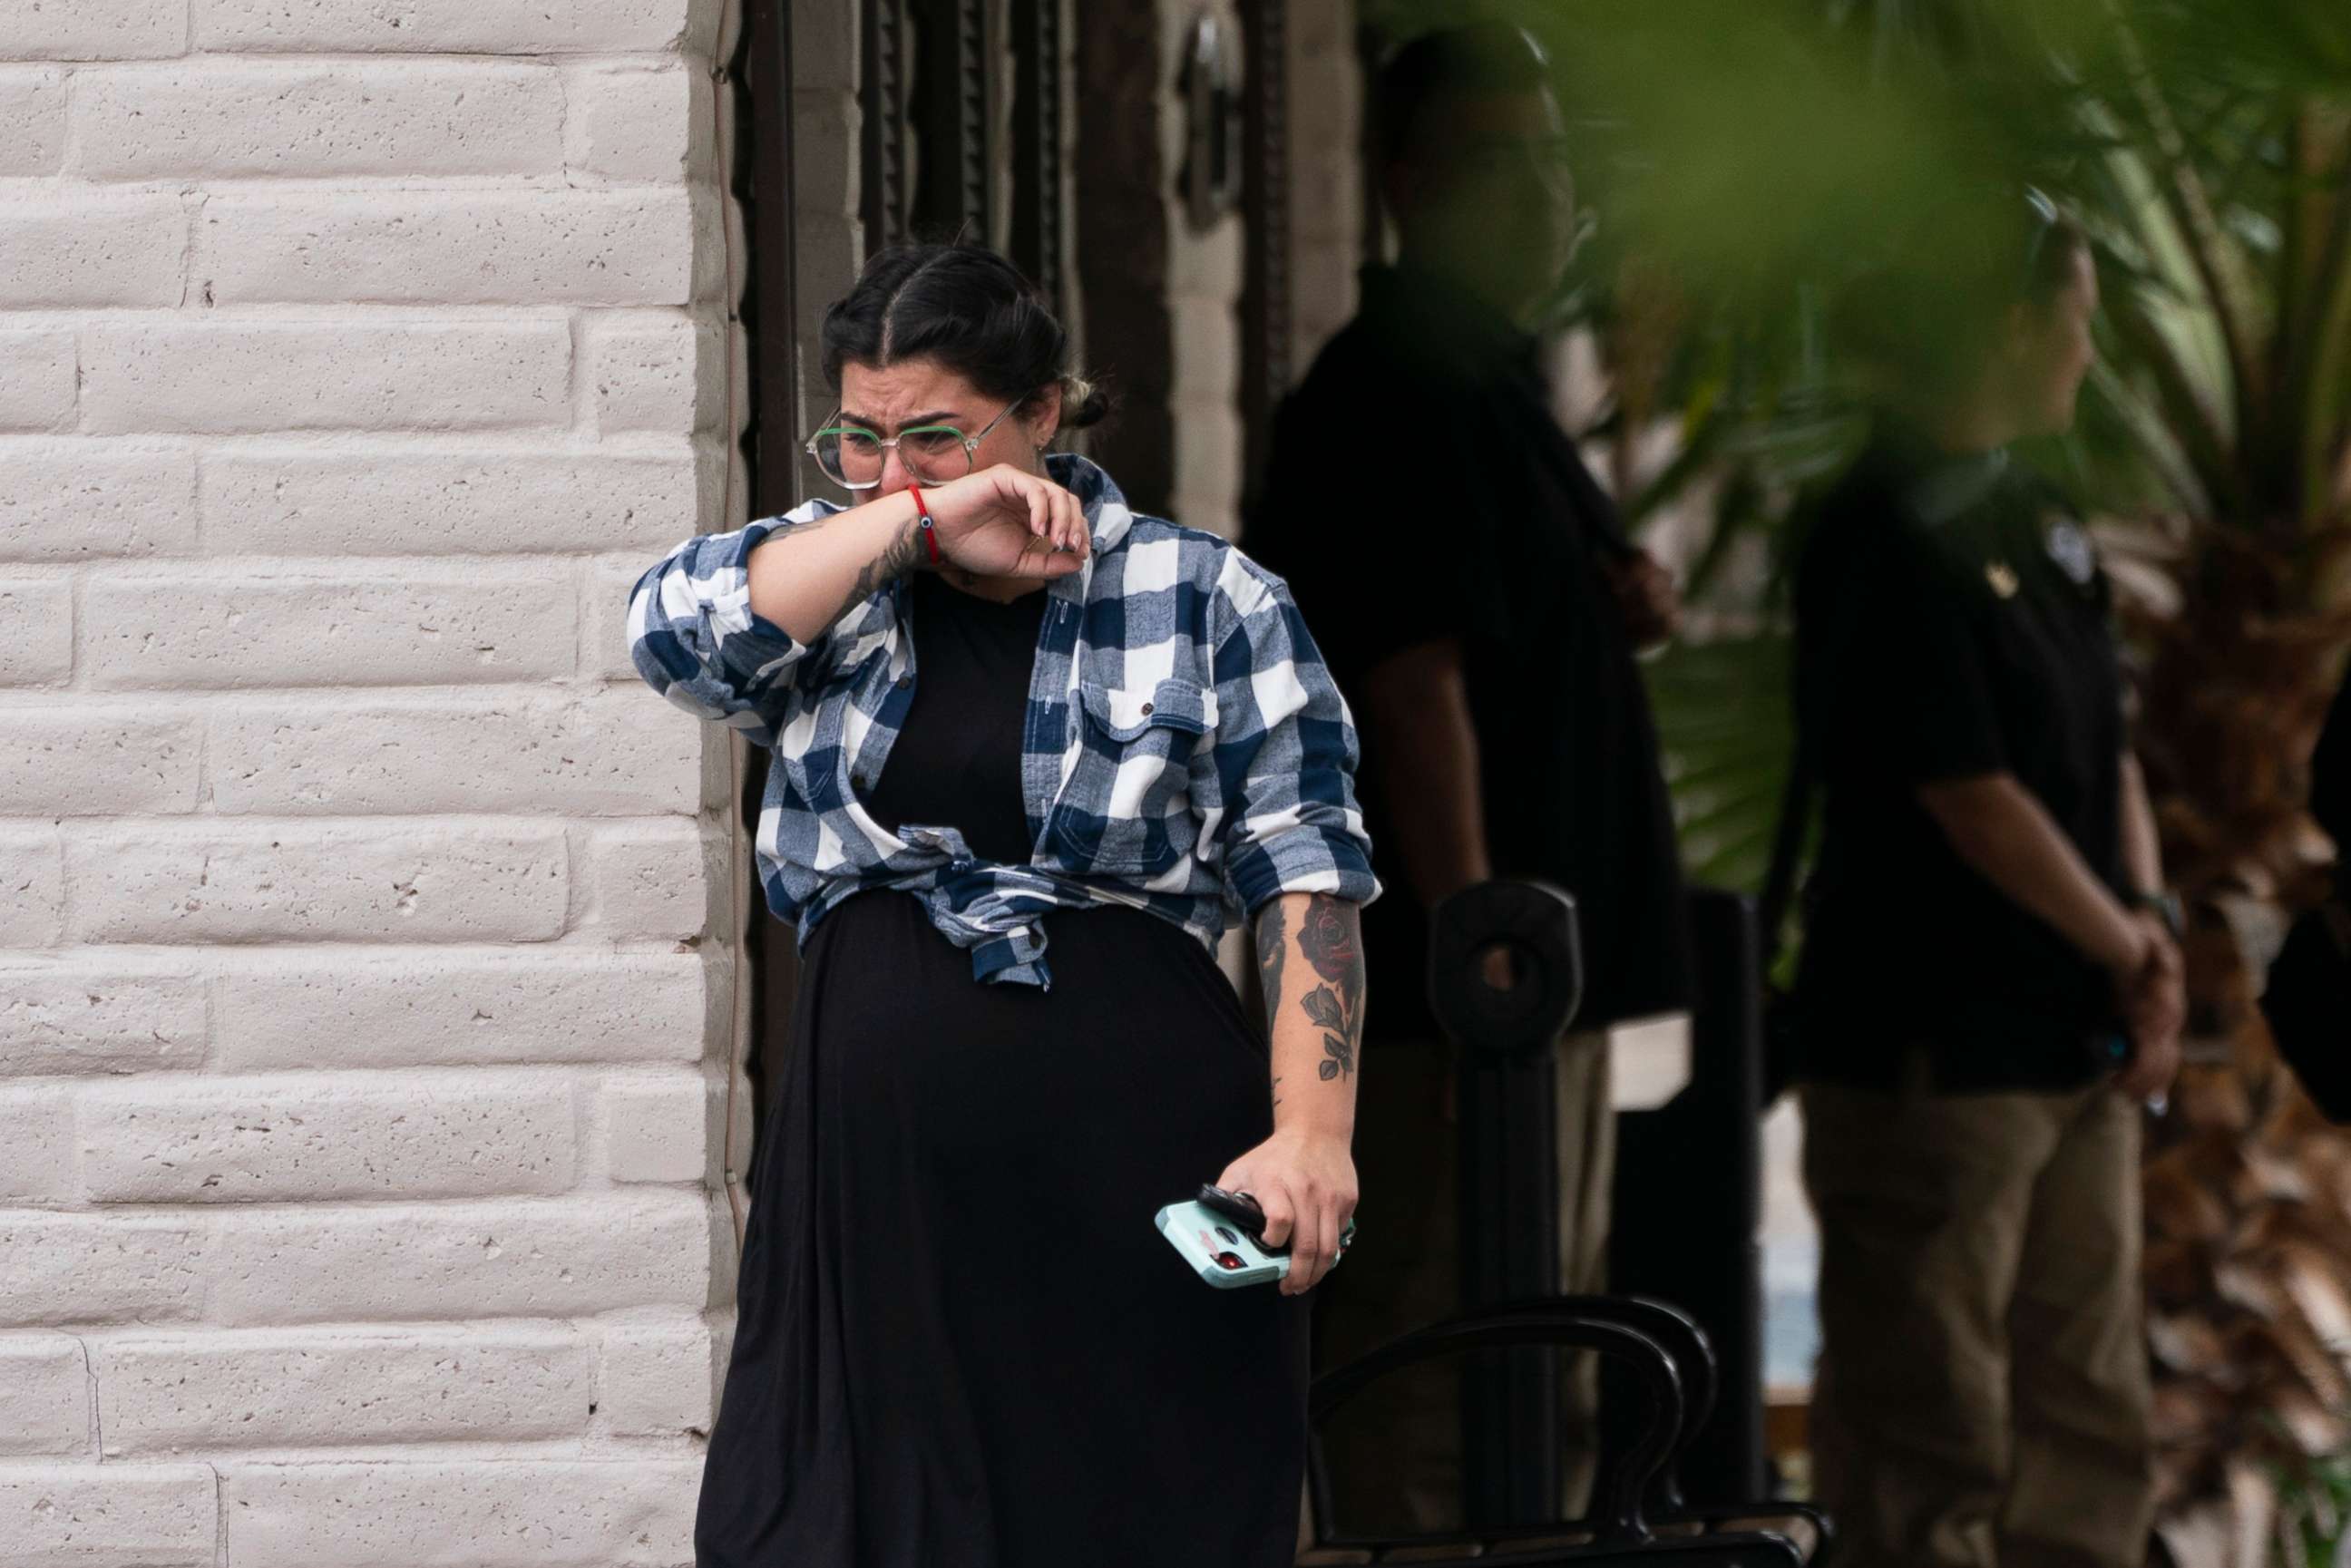 PHOTO: A woman weeps as she leaves a funeral home after attending a visitation for Nevaeh Bravo, one of the victims killed in last week's Robb Elementary School shooting, in Uvalde, Texas, May 31, 2022.